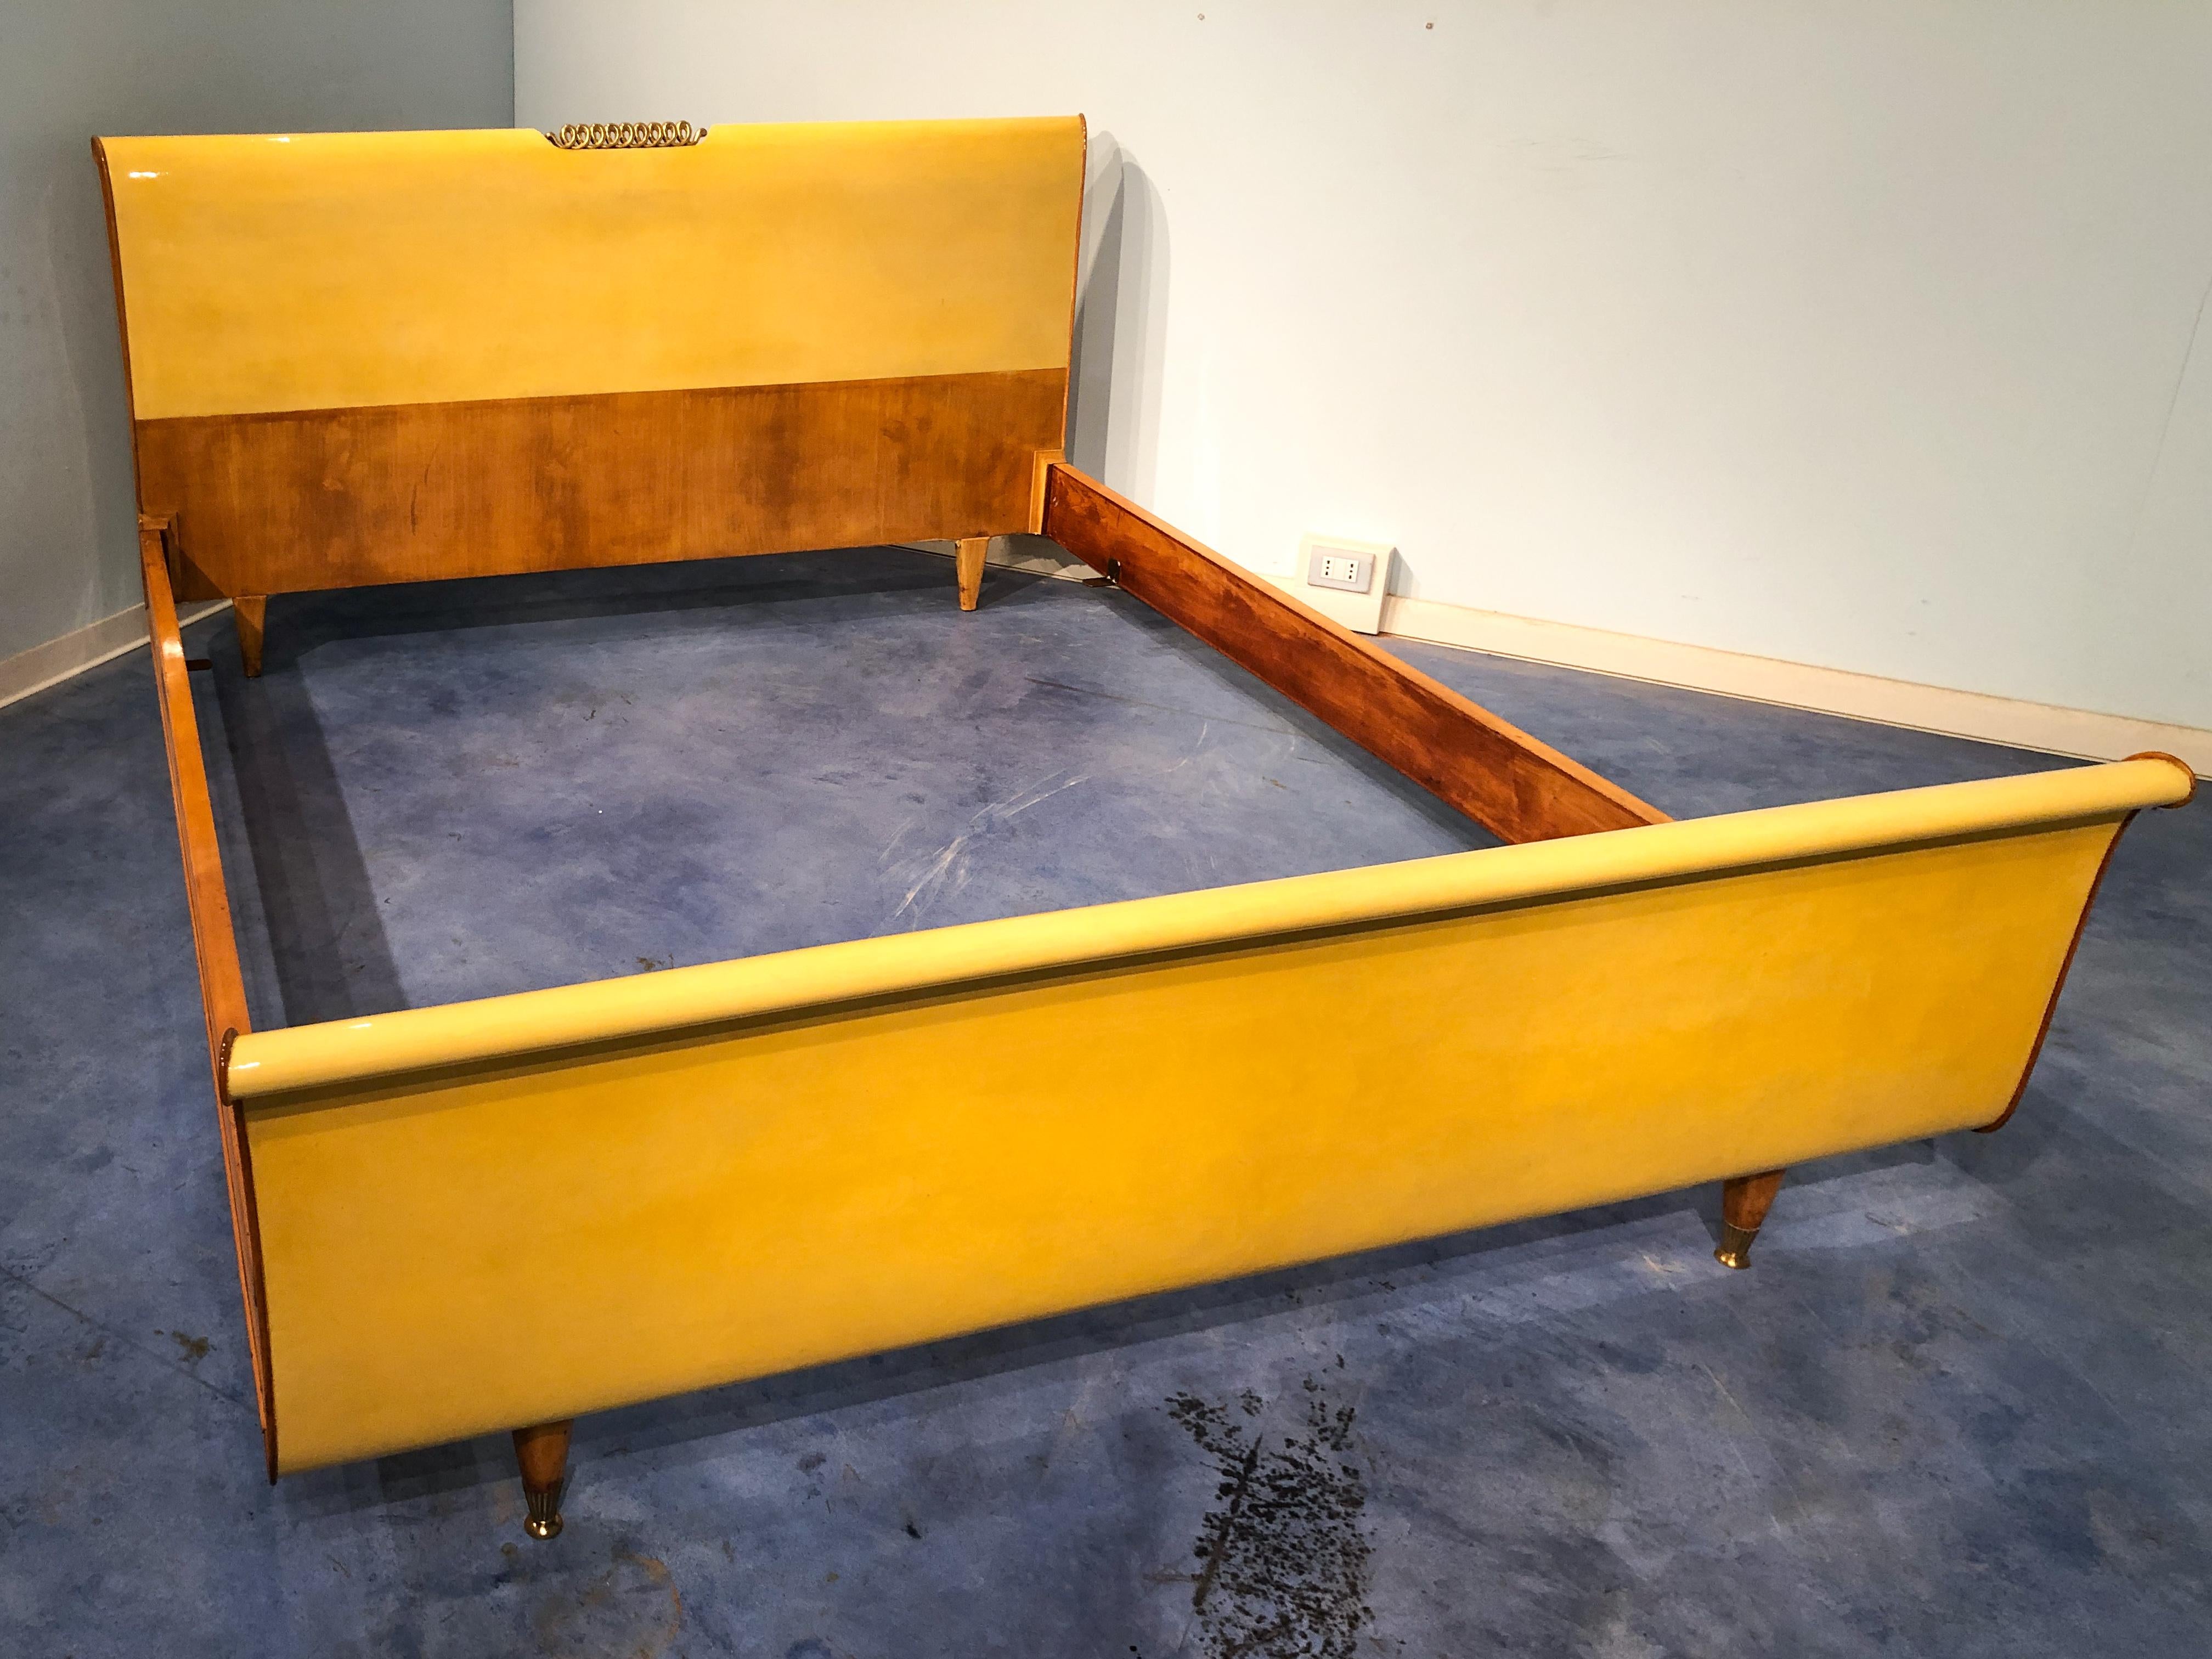 Italian Mid-Century Modern Parchment Bed Frame, 1950s For Sale 7